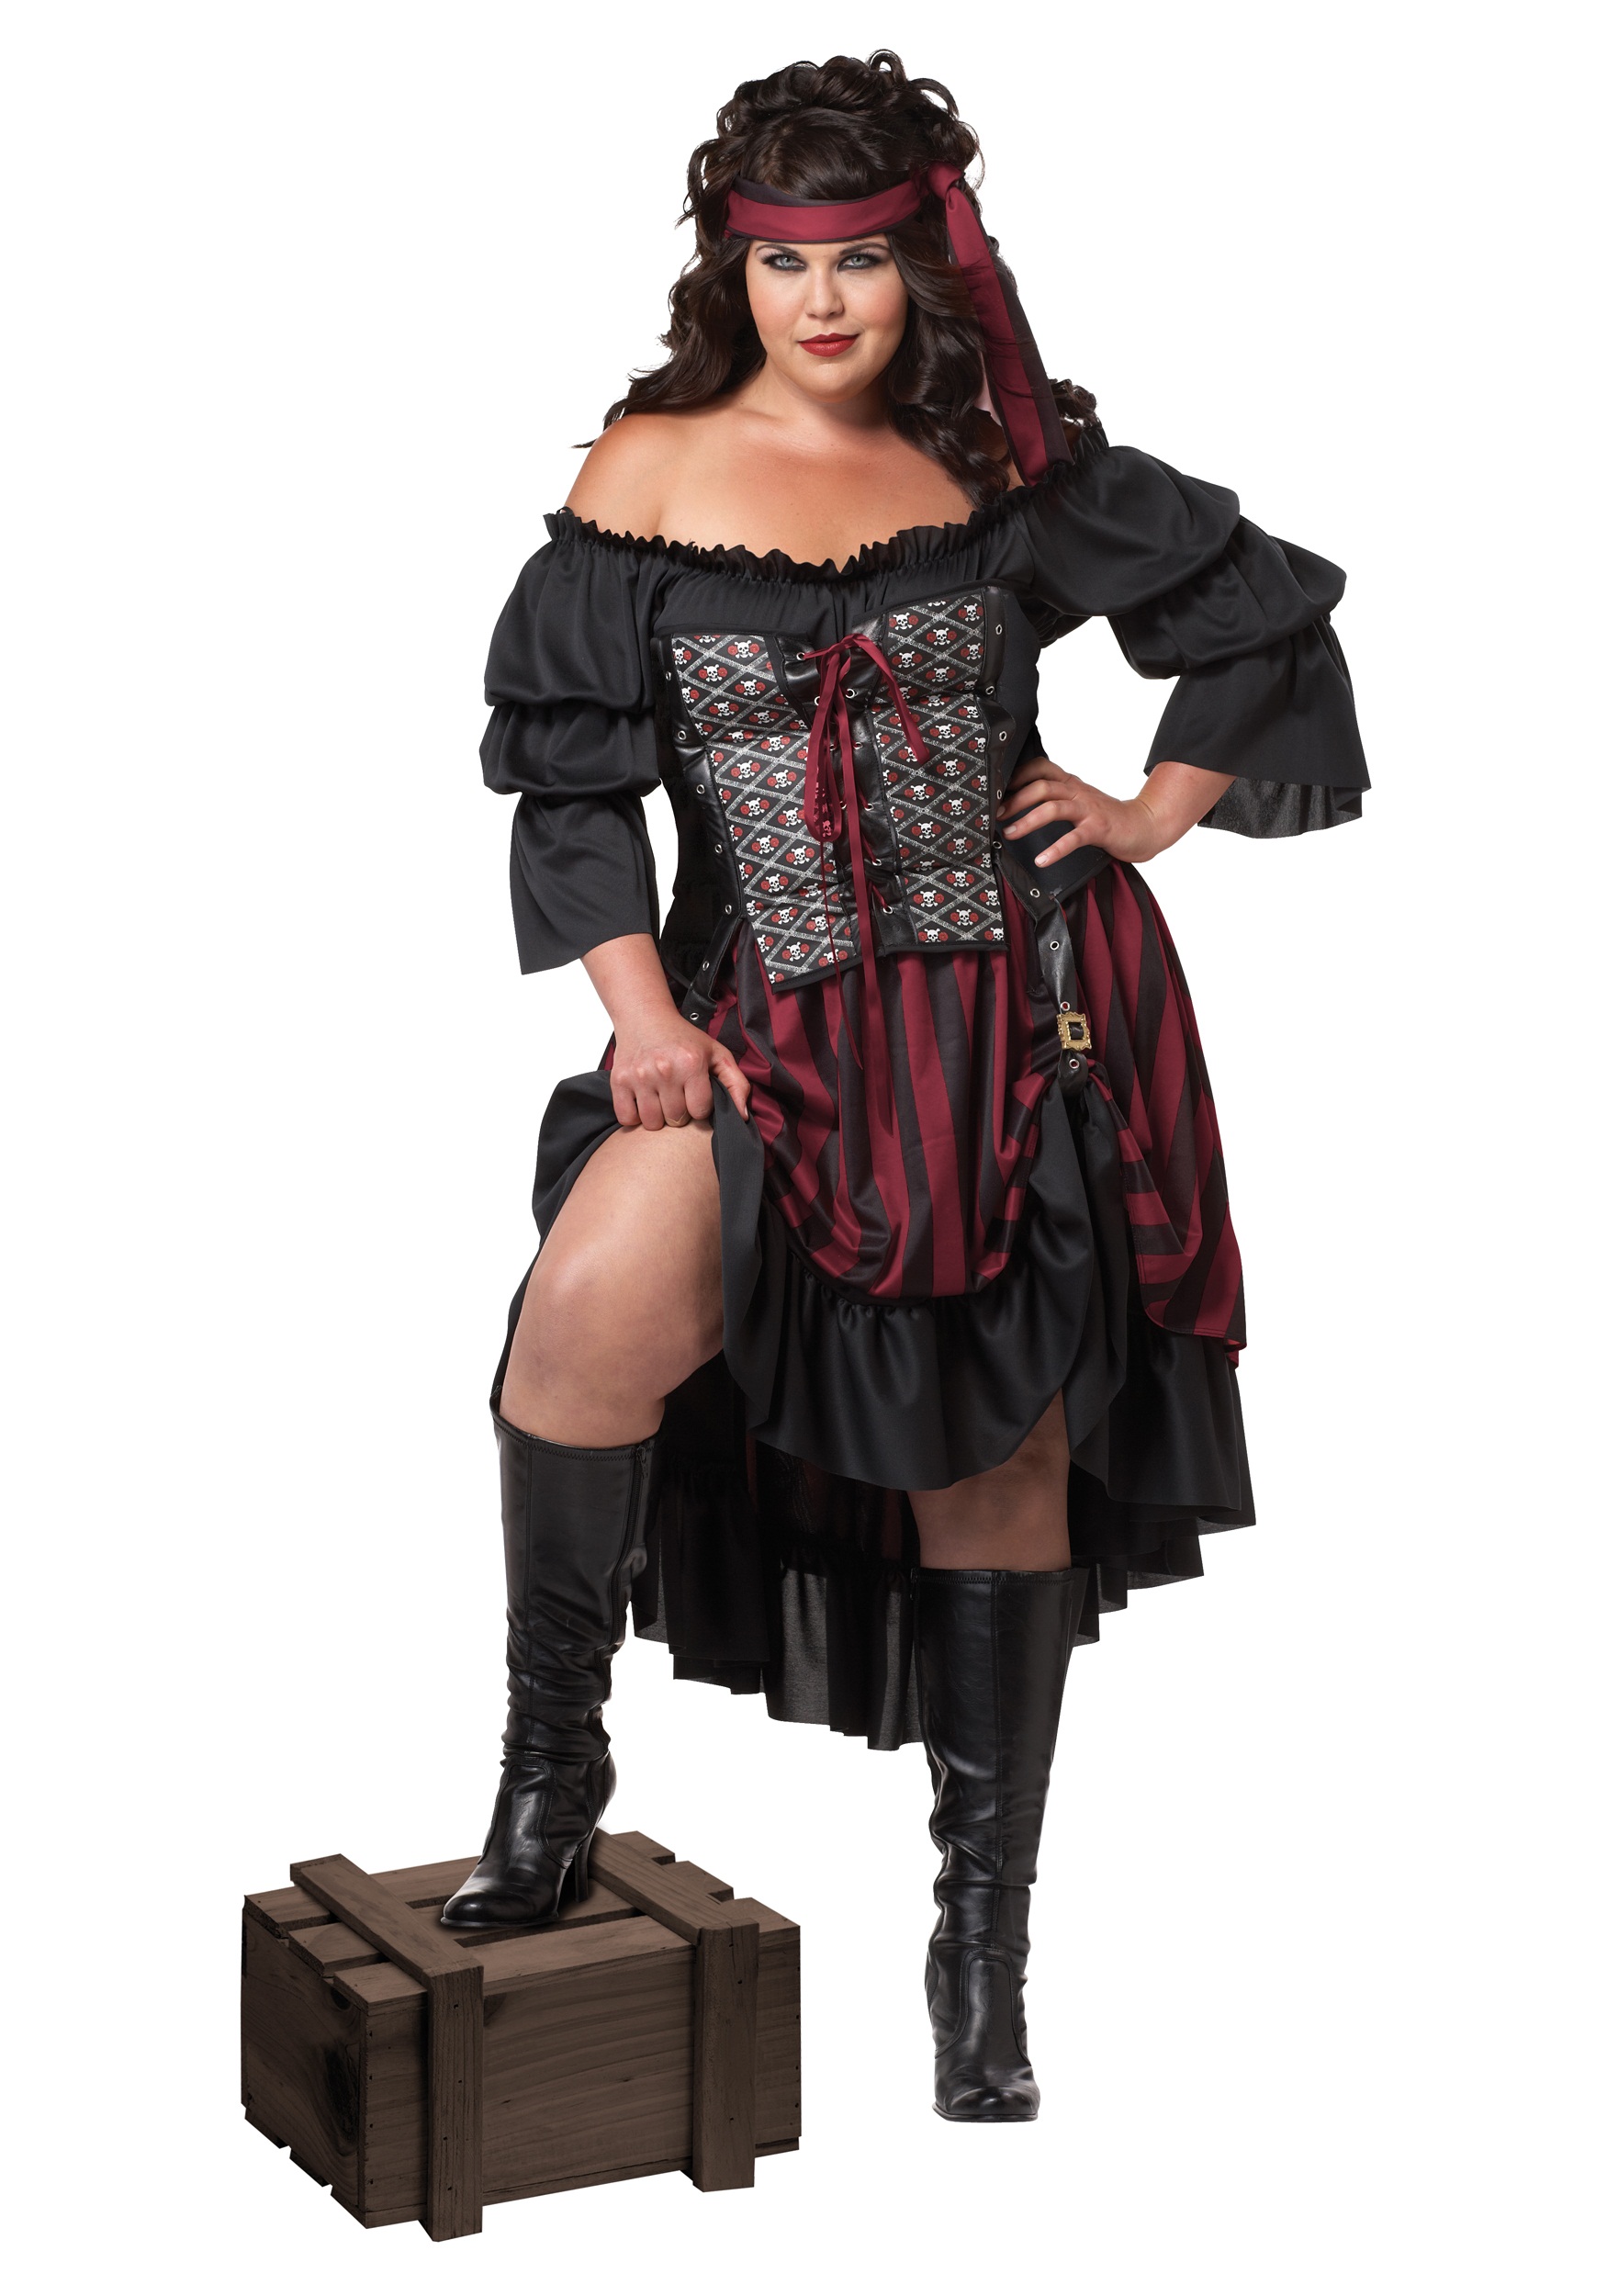 Adult Ladies Caribbean Pirate Woman Wench Fancy Dress Costume BN UK Sizes 6-28 